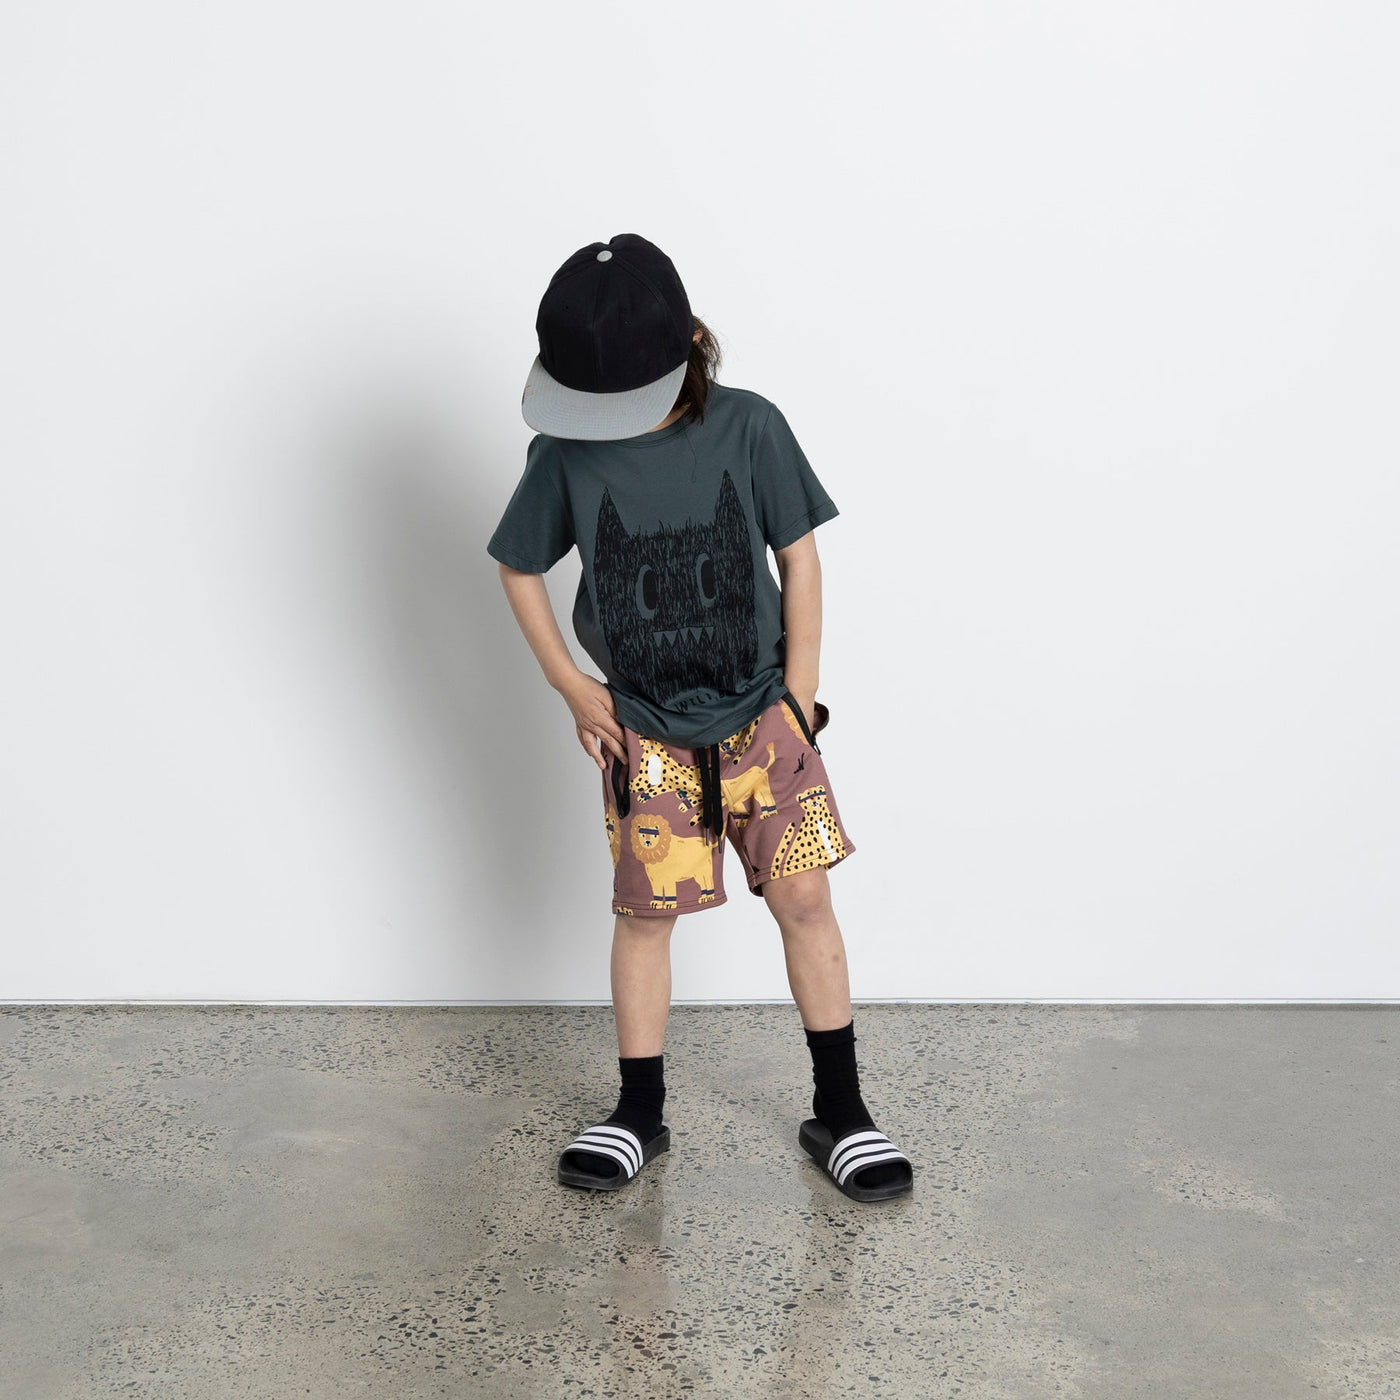 PRE ORDER - Sporty Cubs Short - Chocolate Shorts Minti 